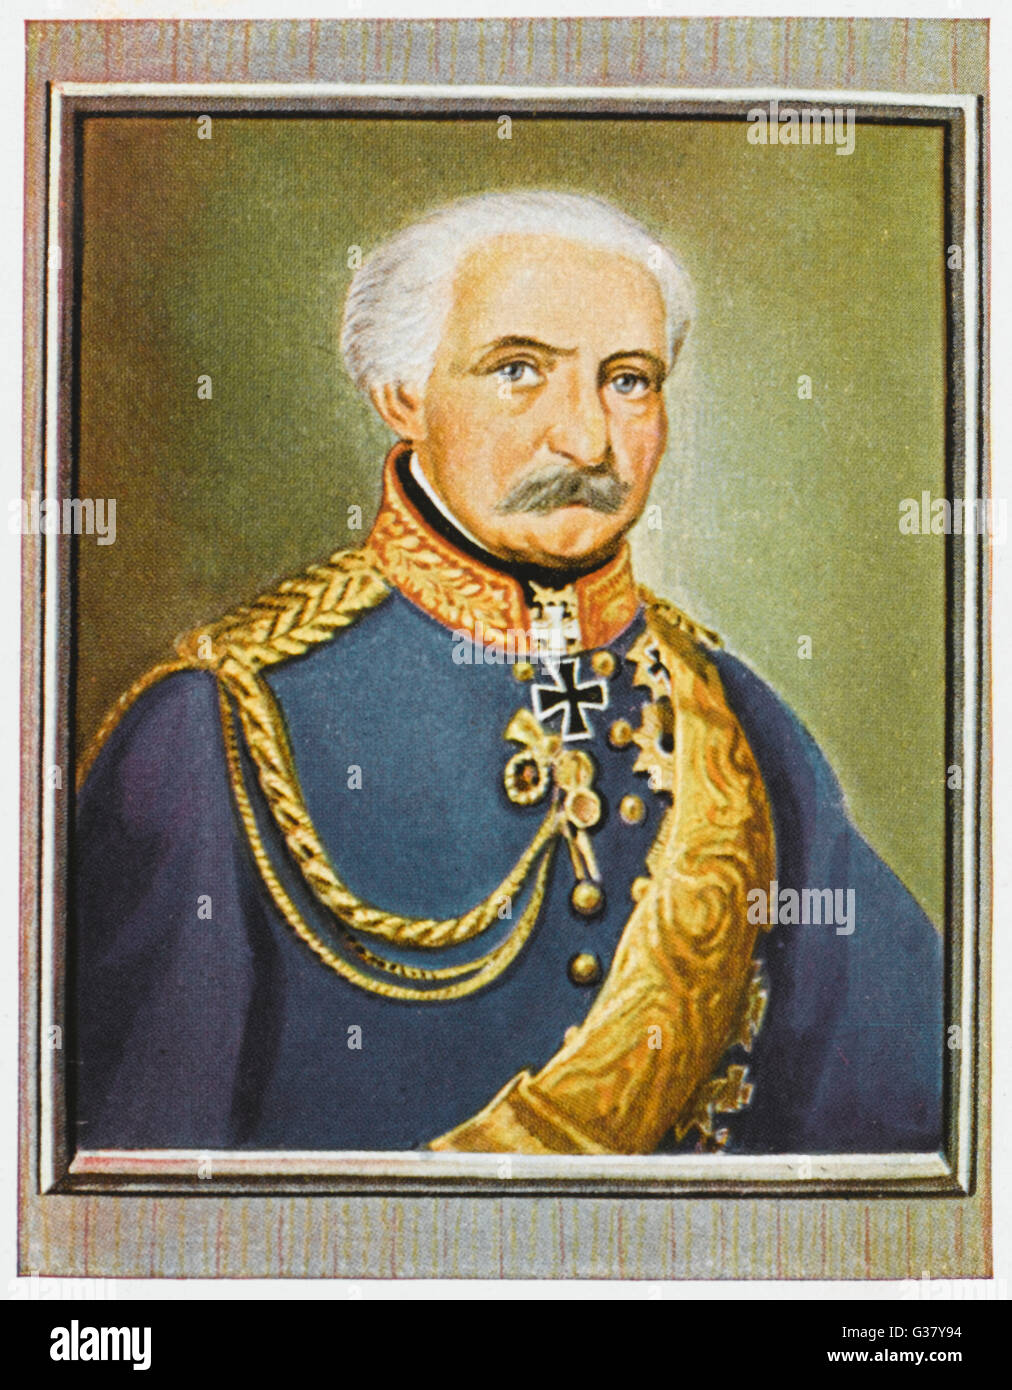 Gebhard Leberecht von Blucher(1742-1819), Prince of Wahlstatt. Prussian field marshal who aided Wellington in victory at the battle of Waterloo. Stock Photo